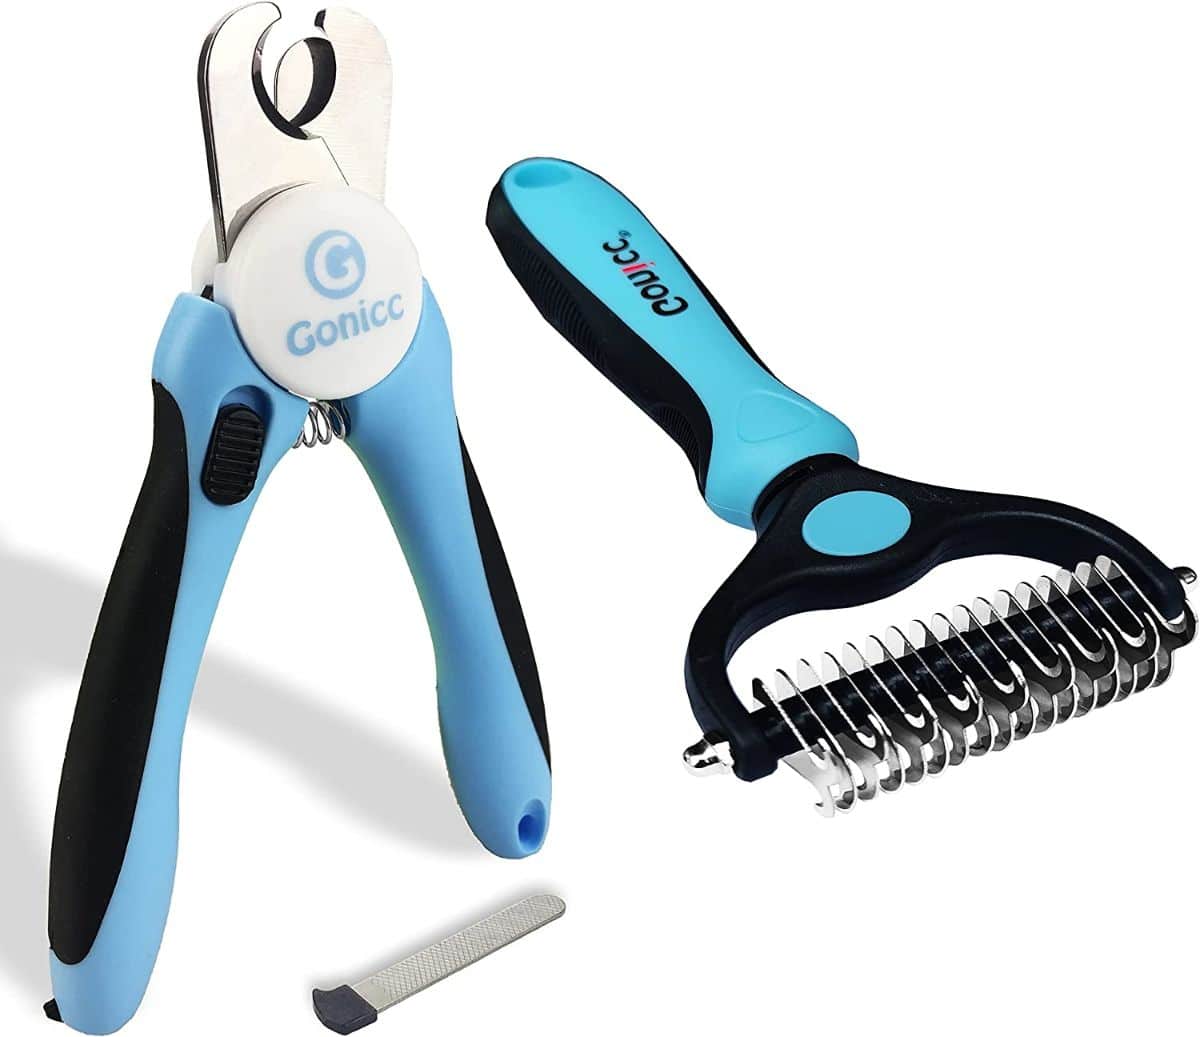 Gonicc Pets Nail Clippers